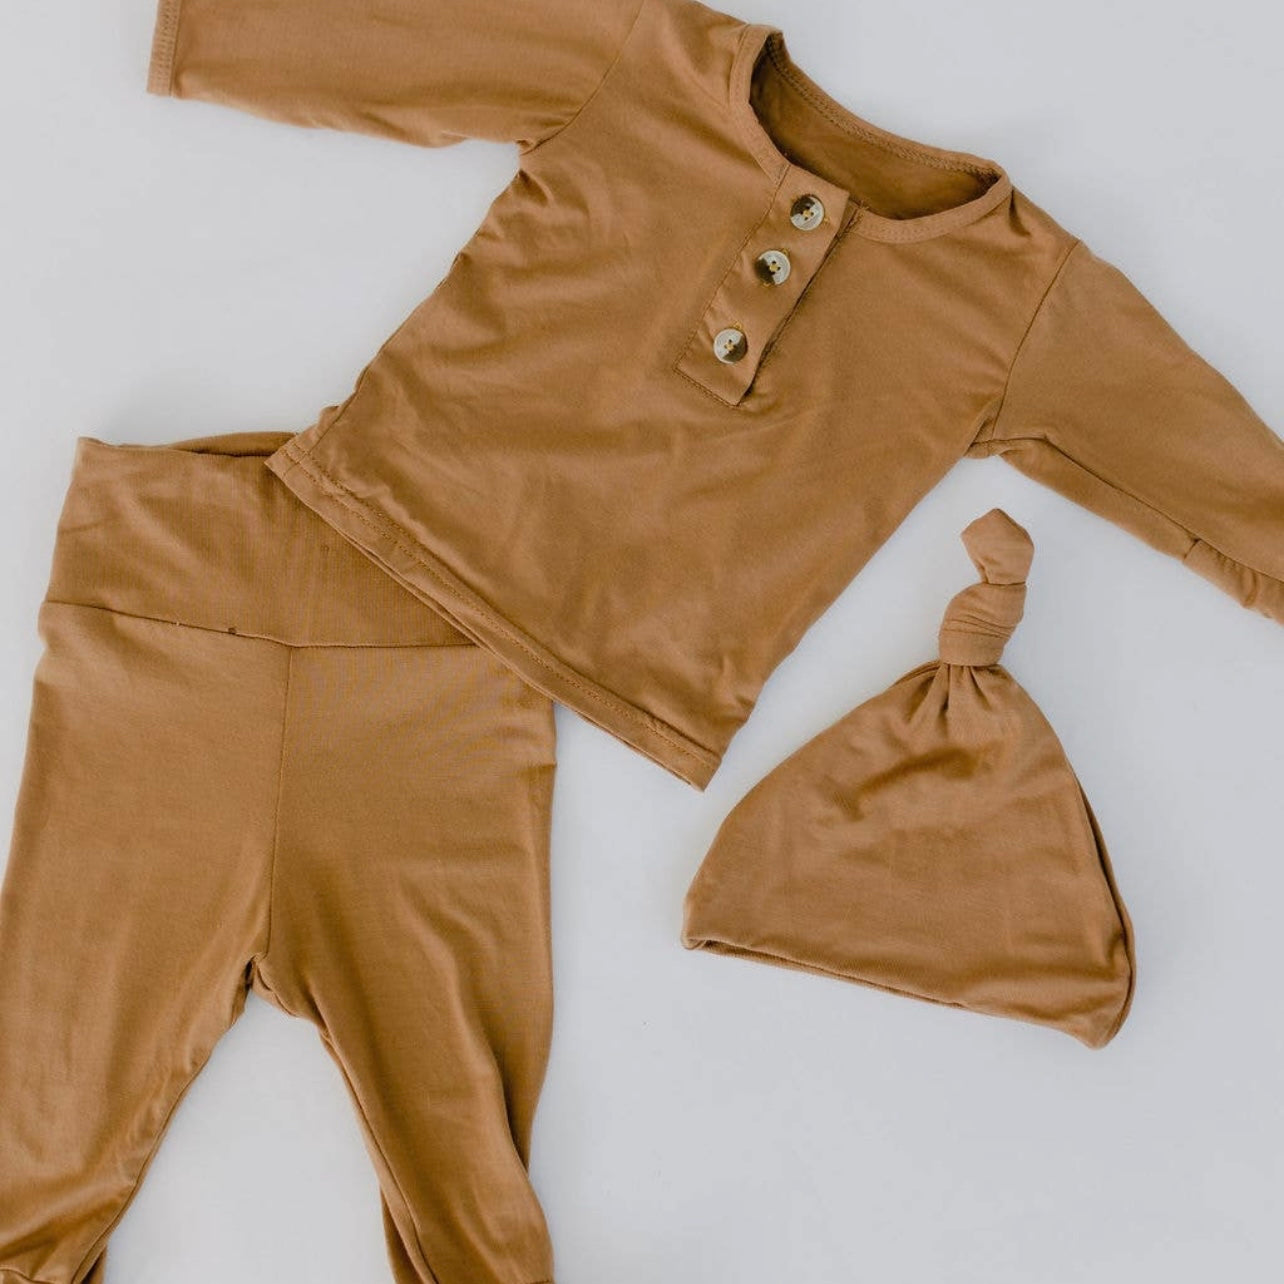 Top & Bottom Baby Outfit